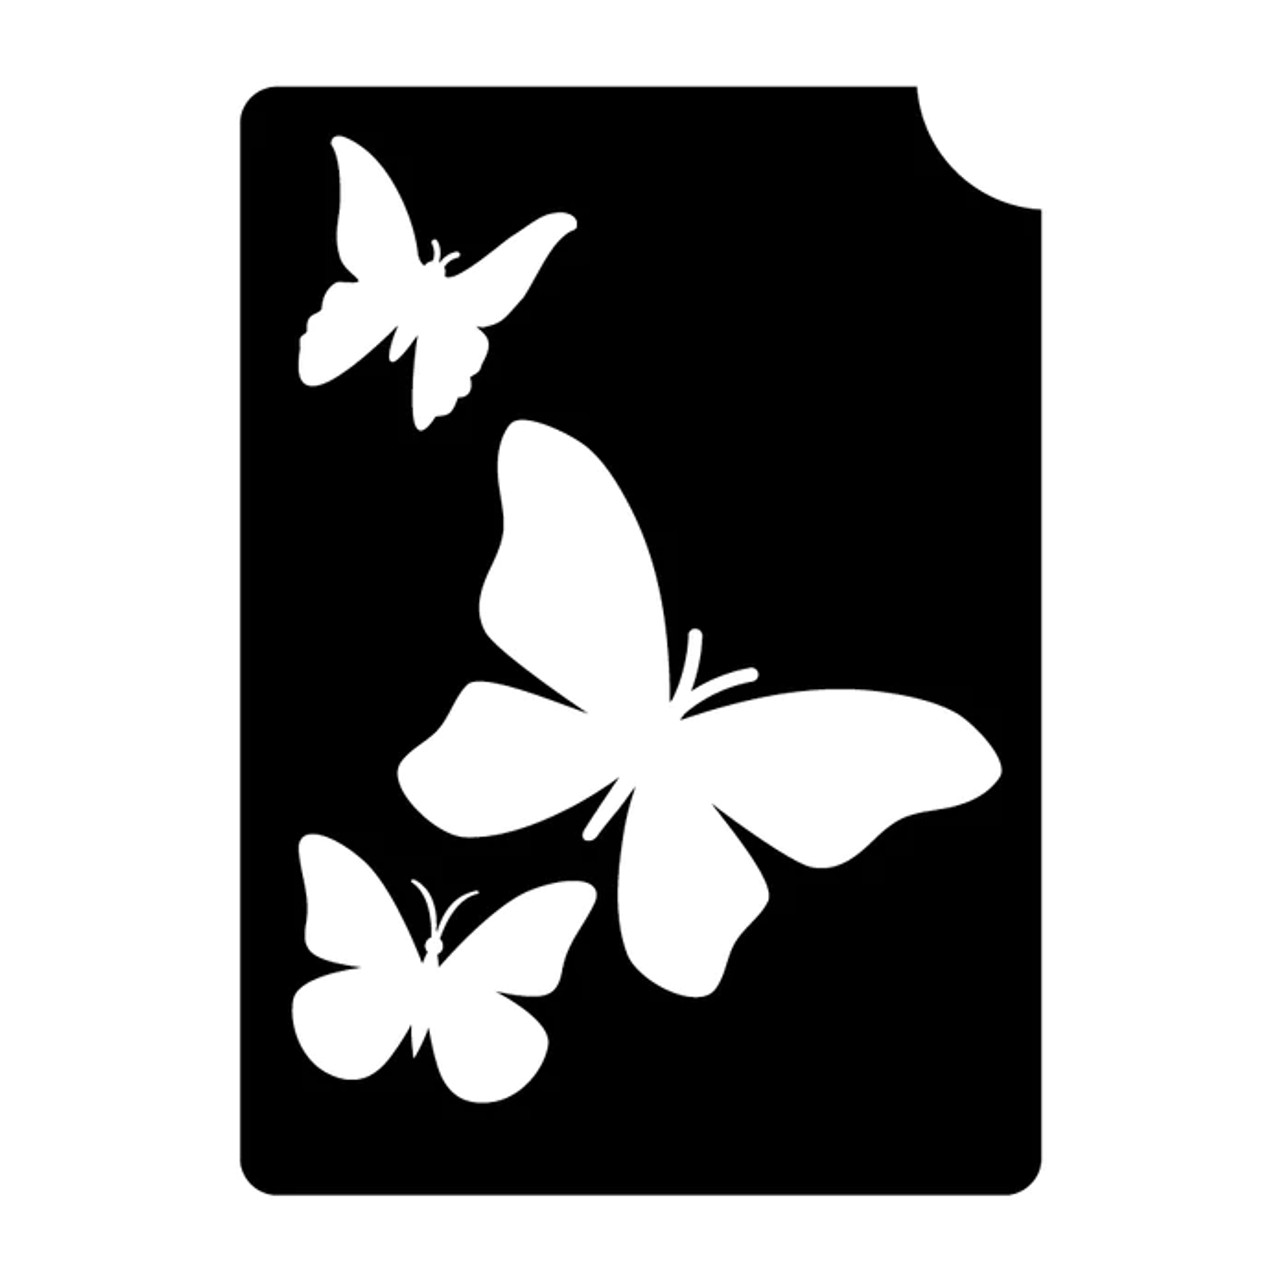 Butterfly Stamp - Silicone Cling Stamp and Mat Mold